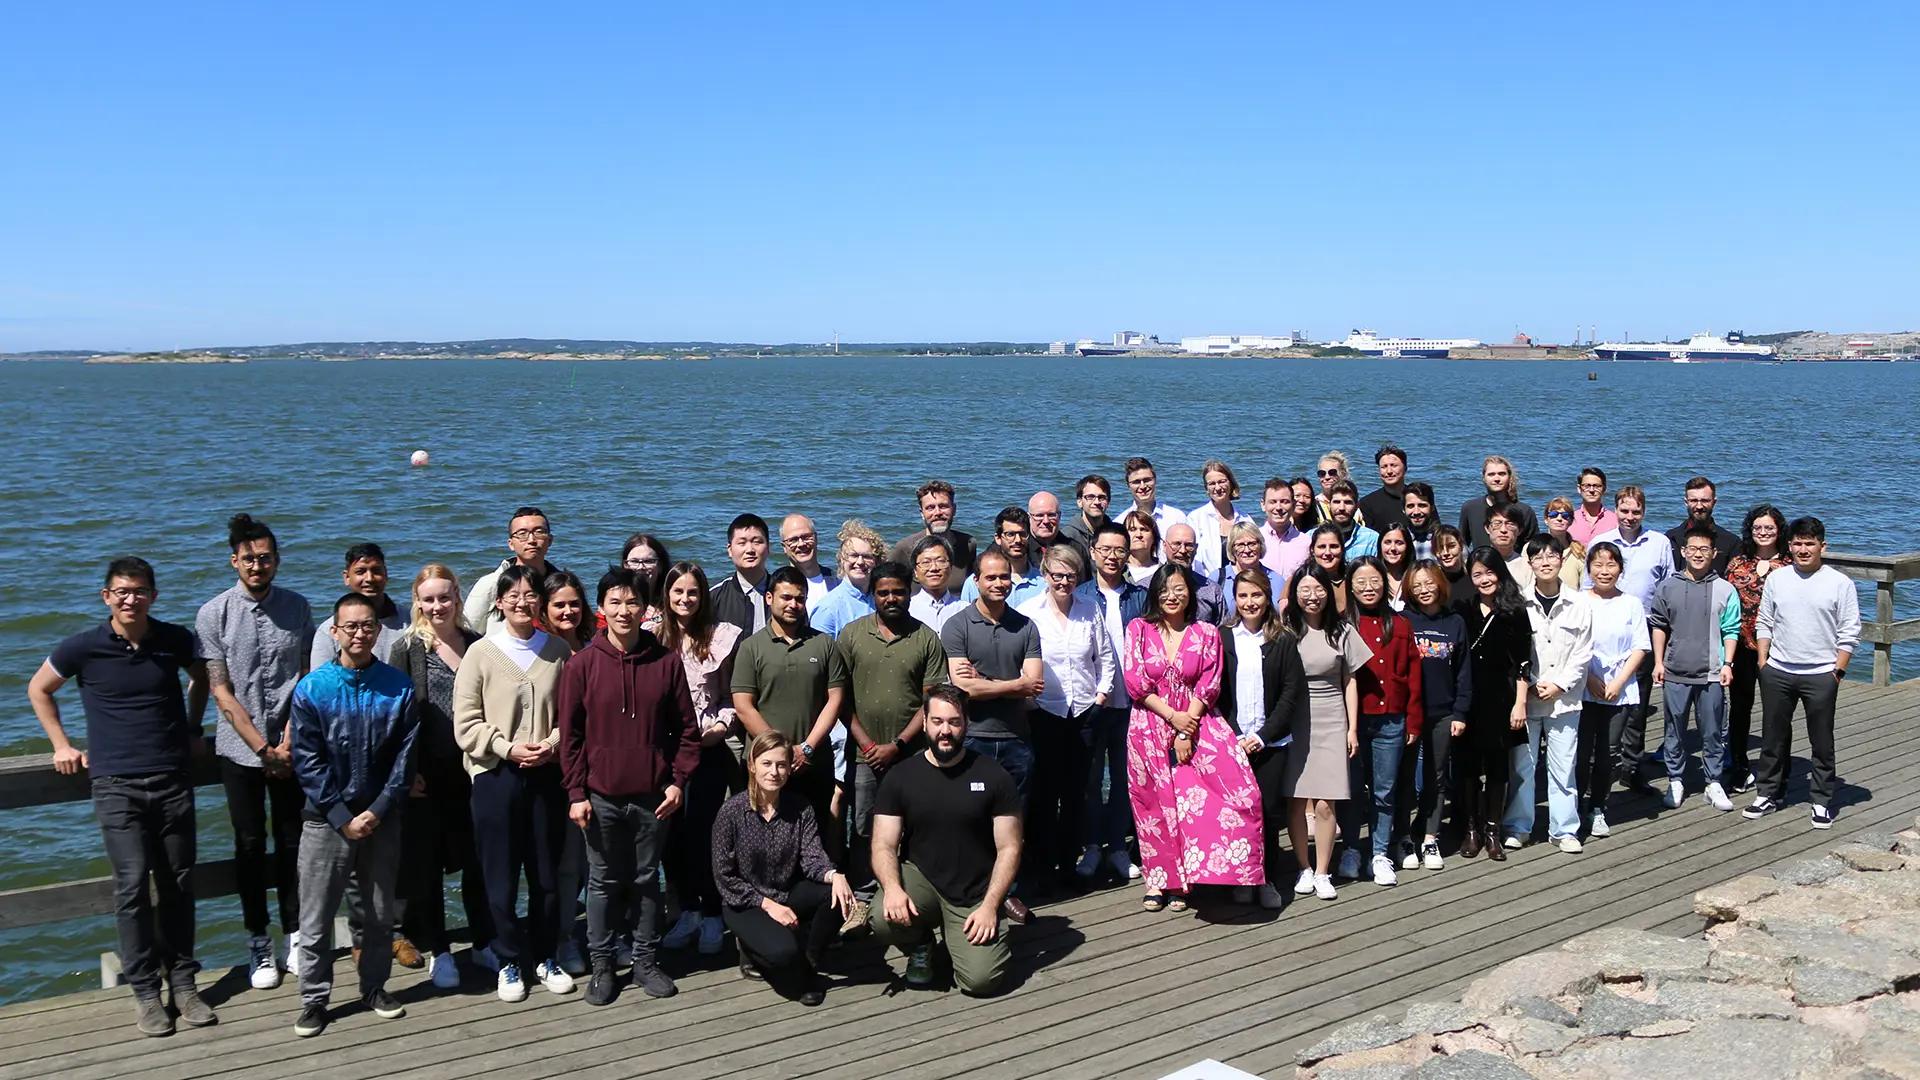 Group photo of all members of the division of systems and synthetic biology